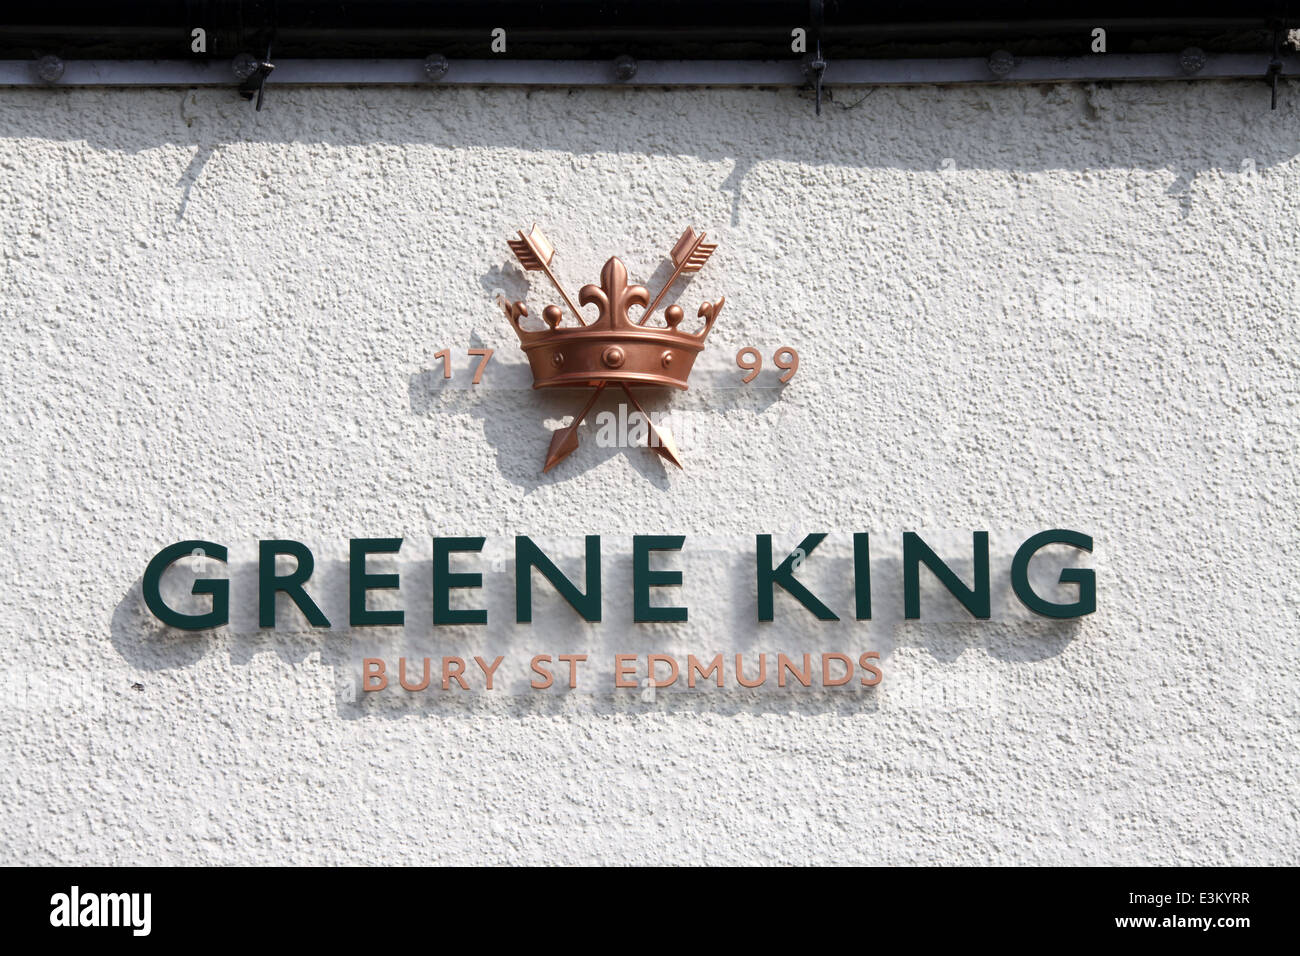 Greene King Brewery Sign on a Public House Stock Photo